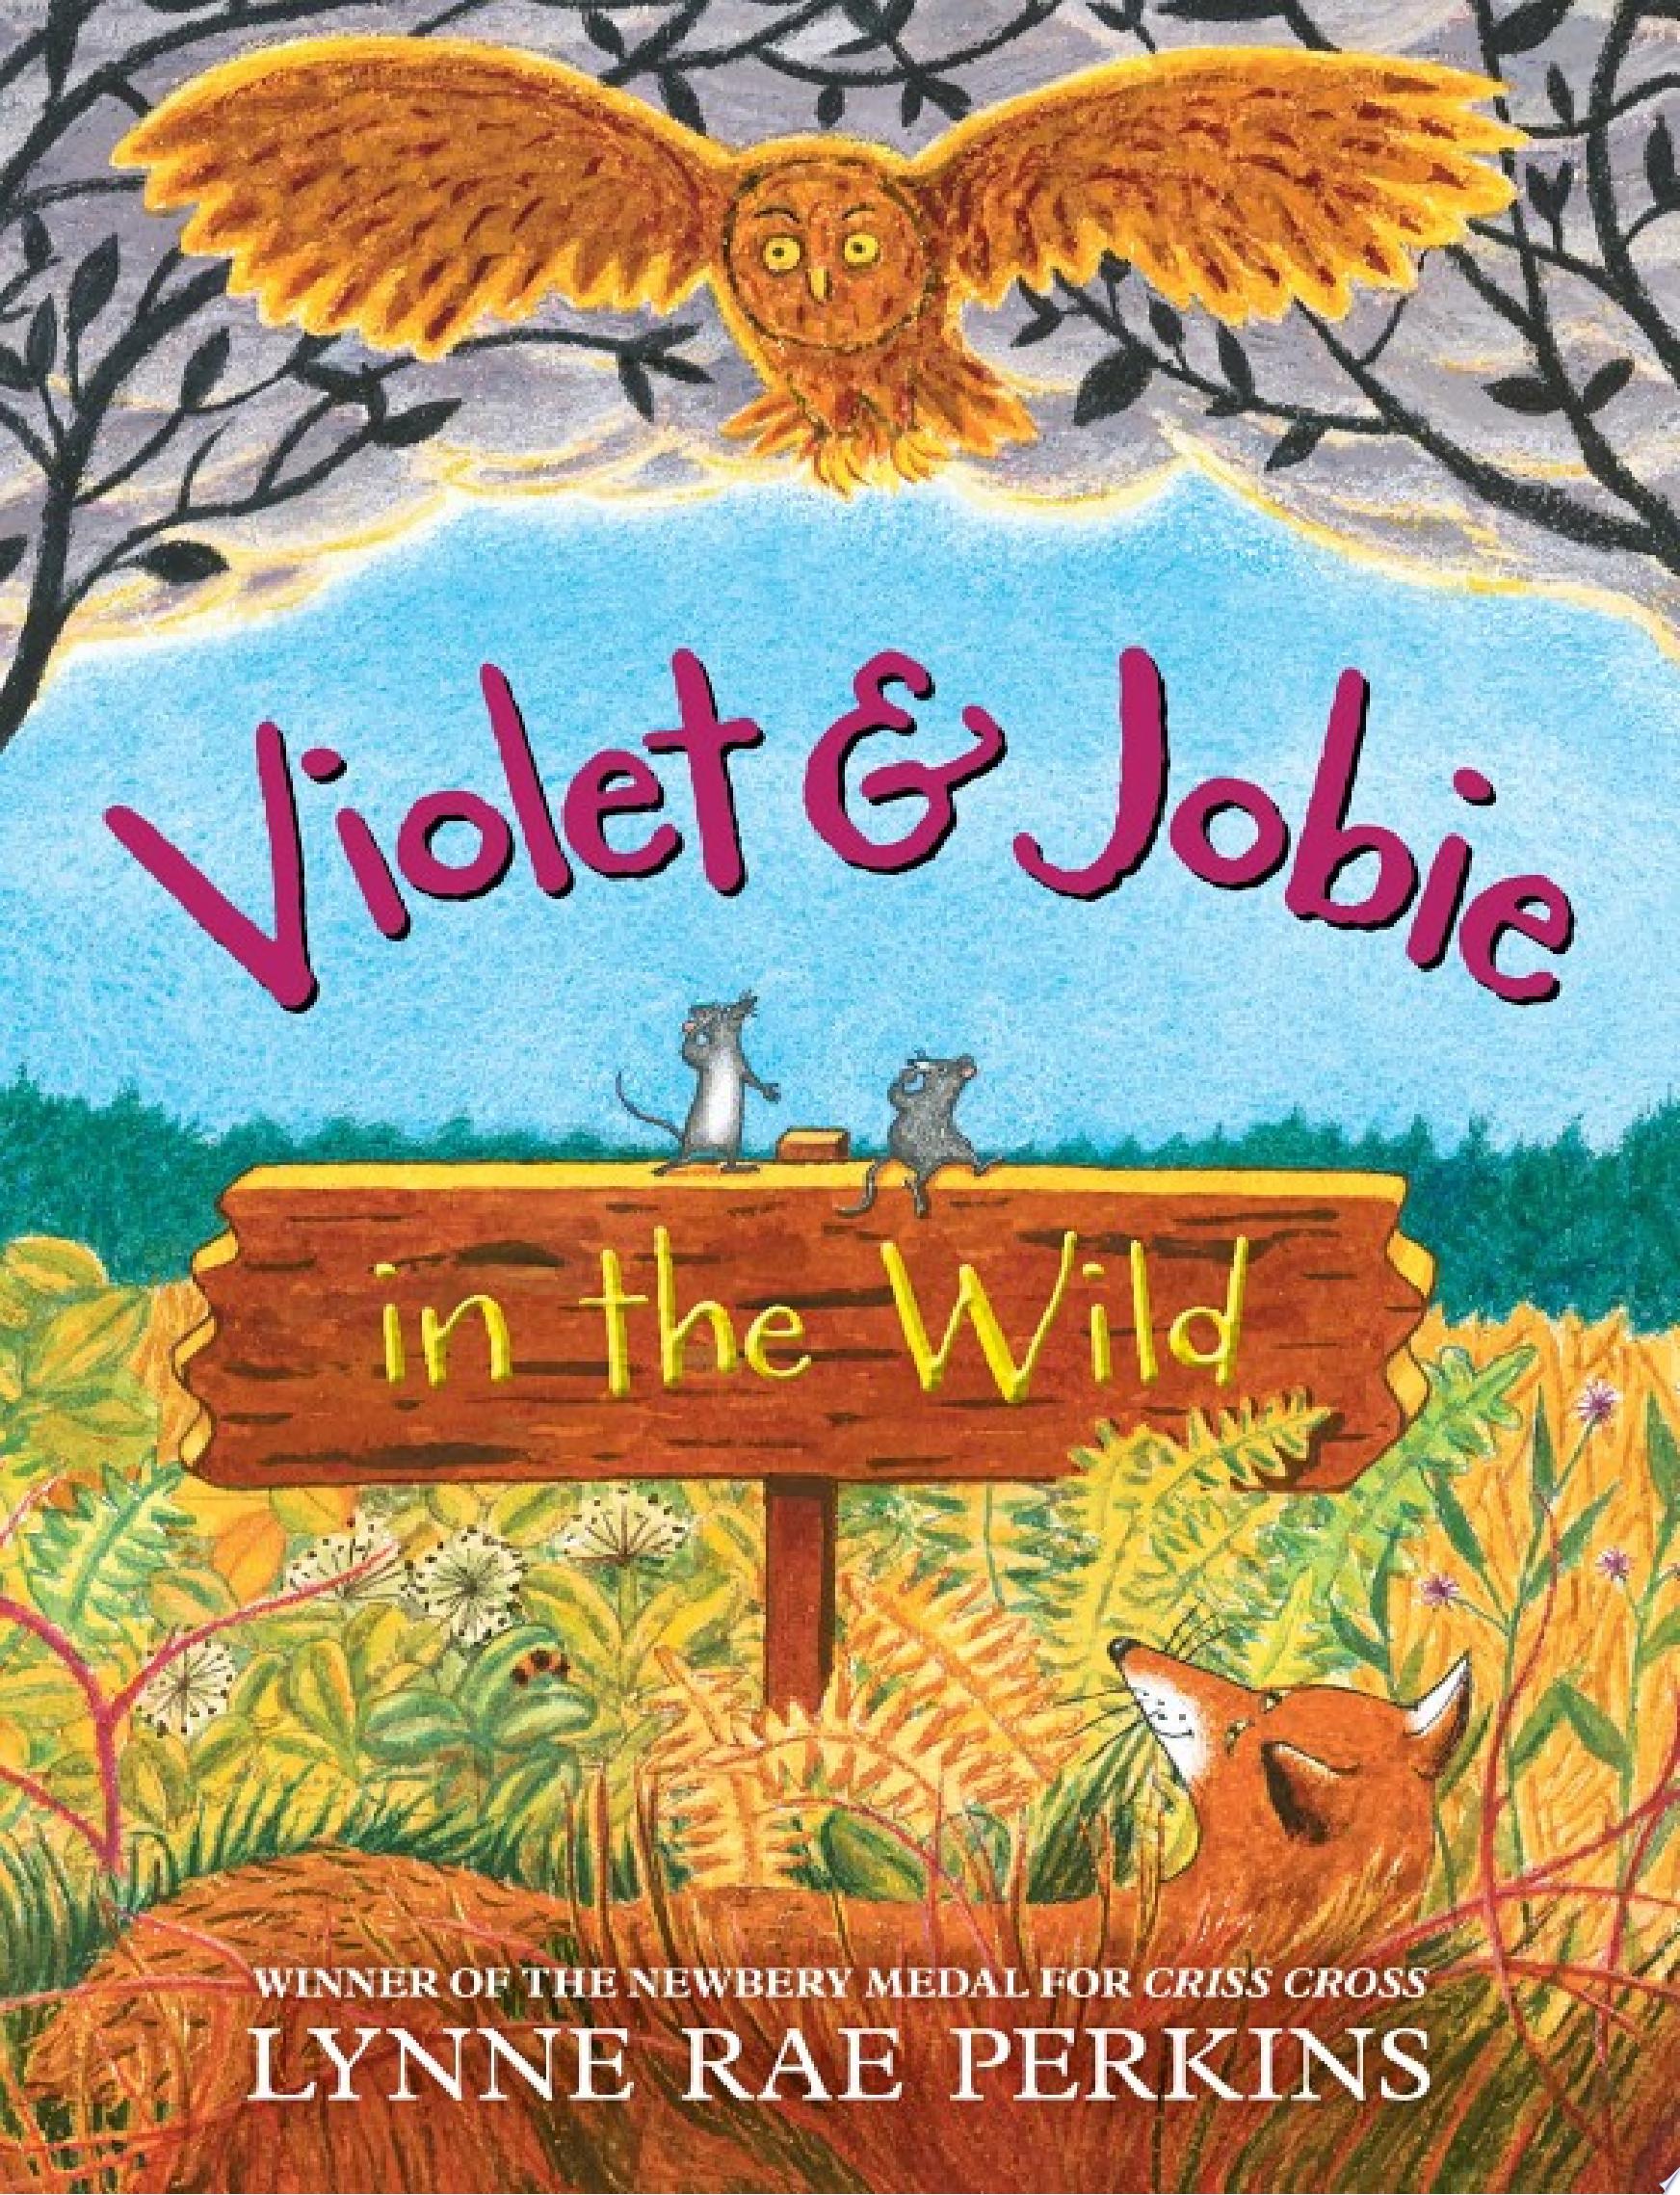 Image for "Violet and Jobie in the Wild"